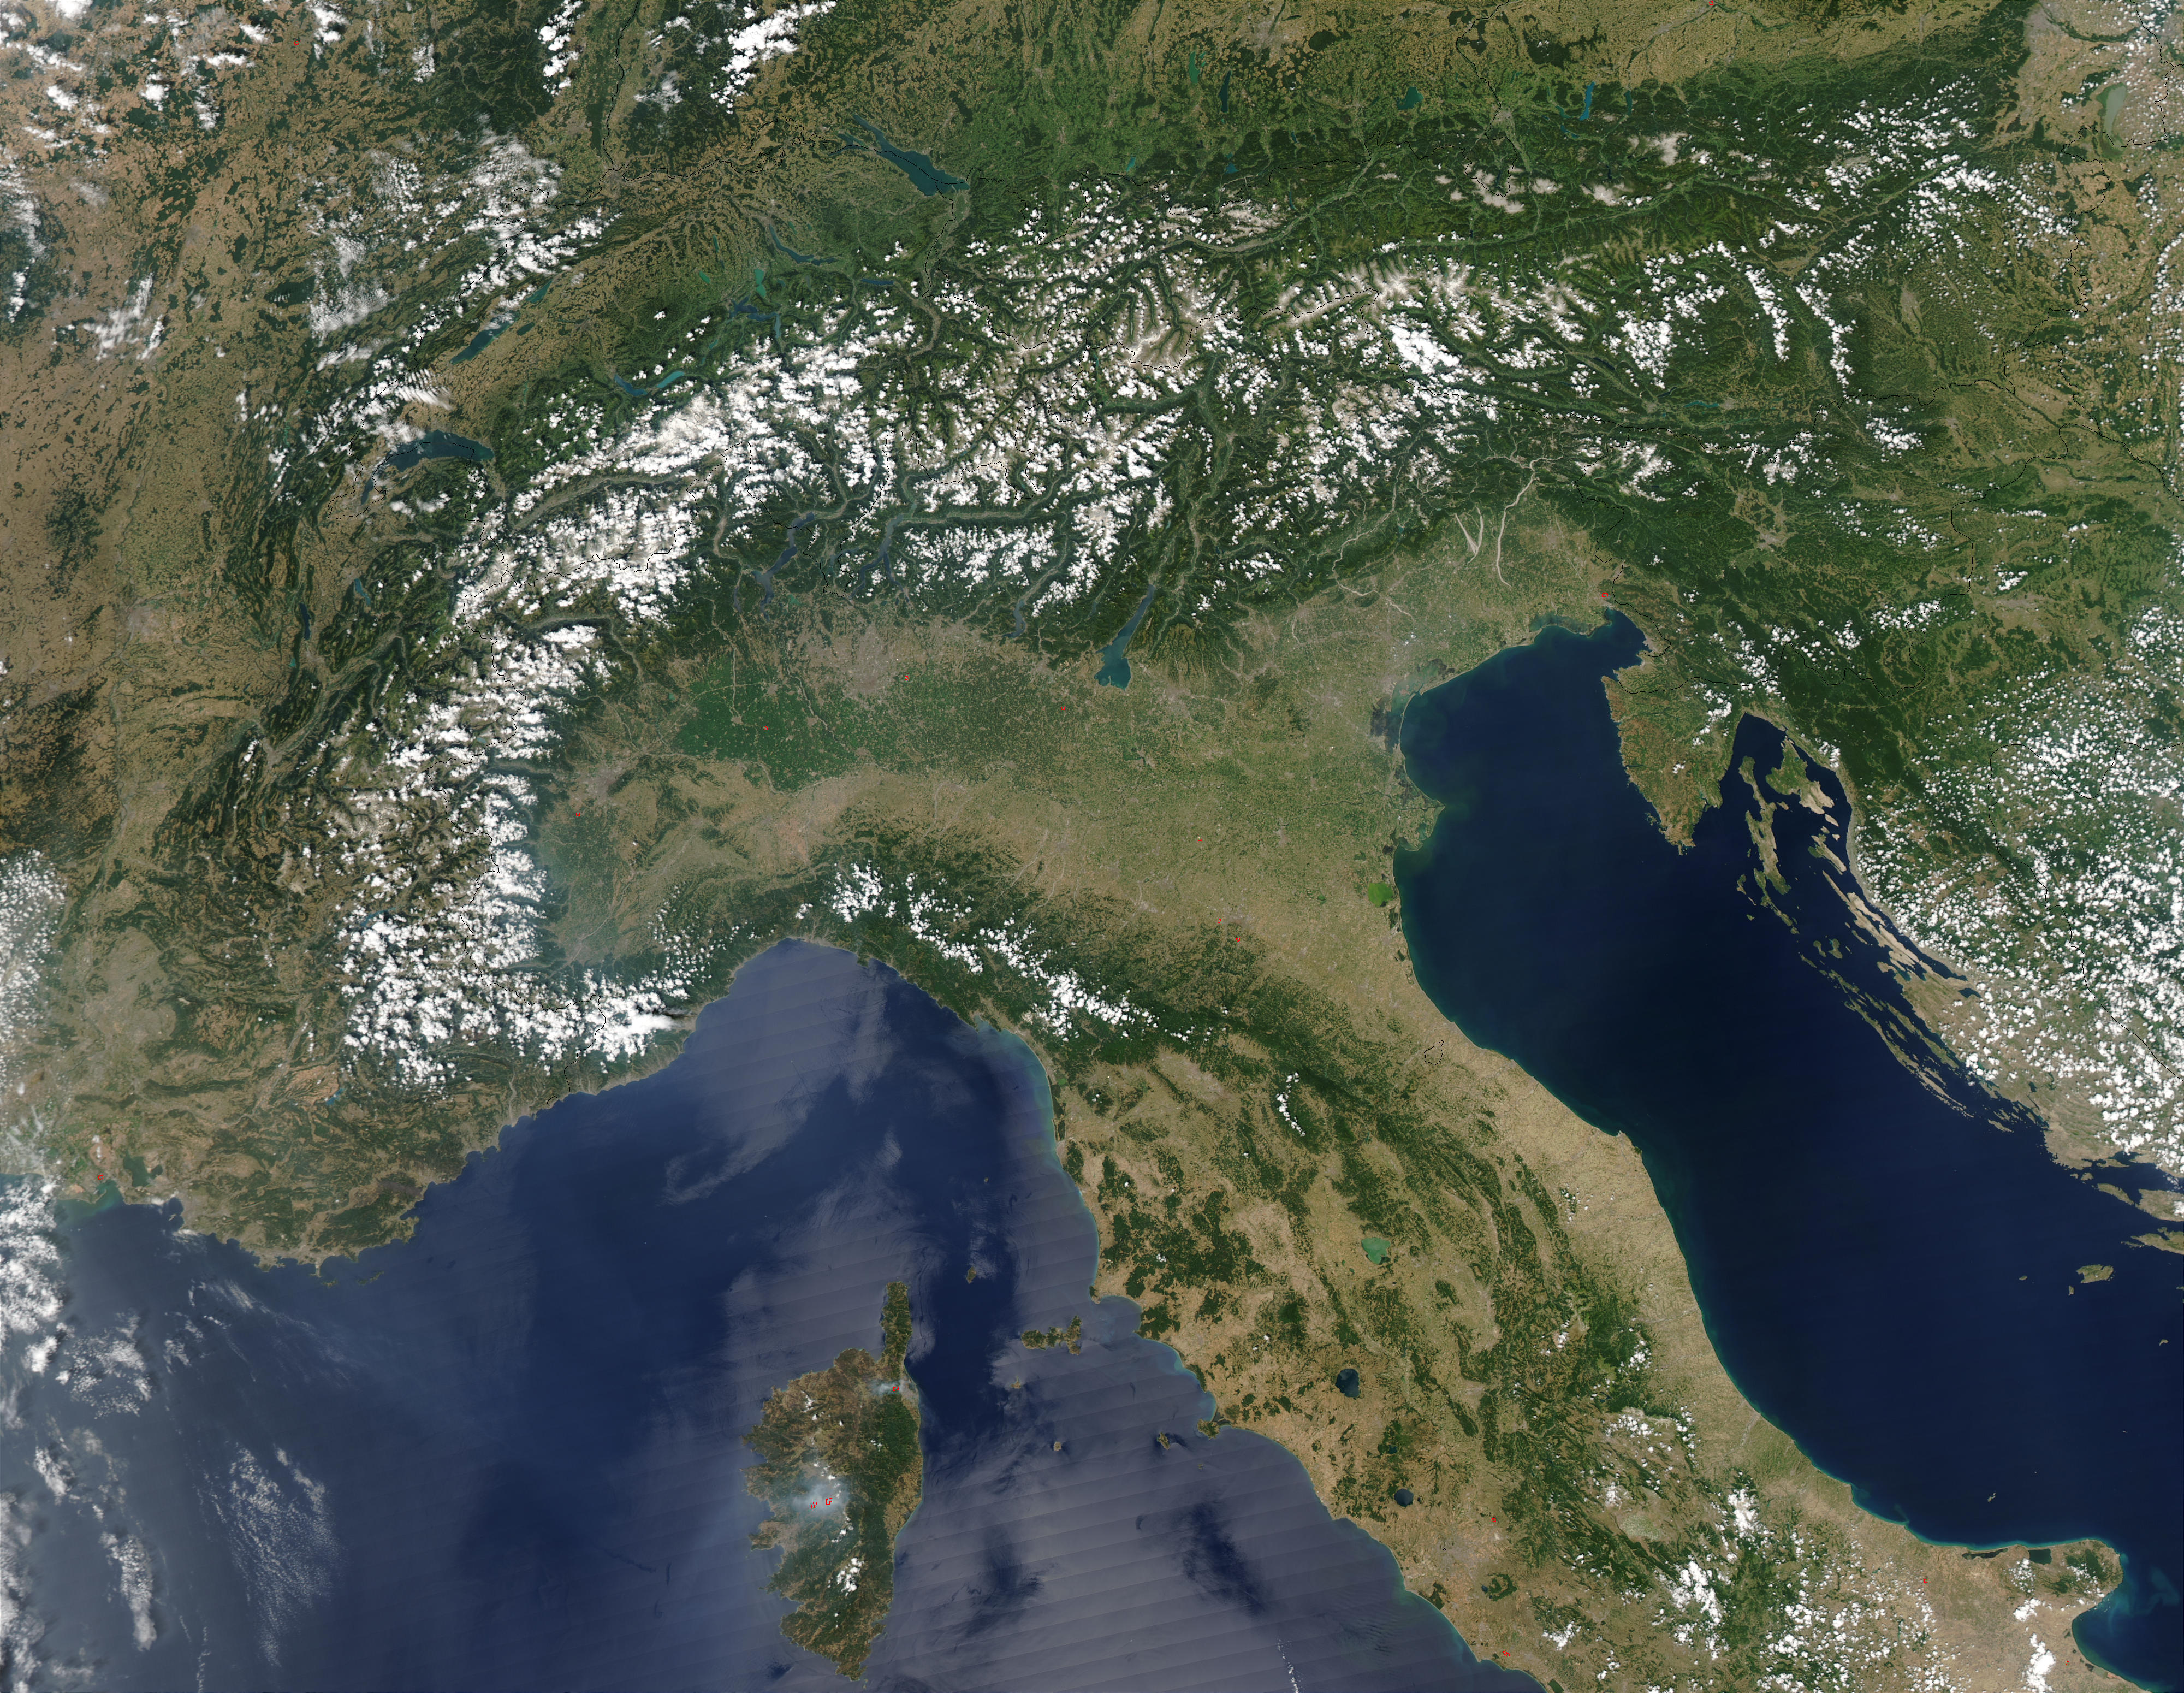 A few fires were detected across Italy (center) on July 20, 2003